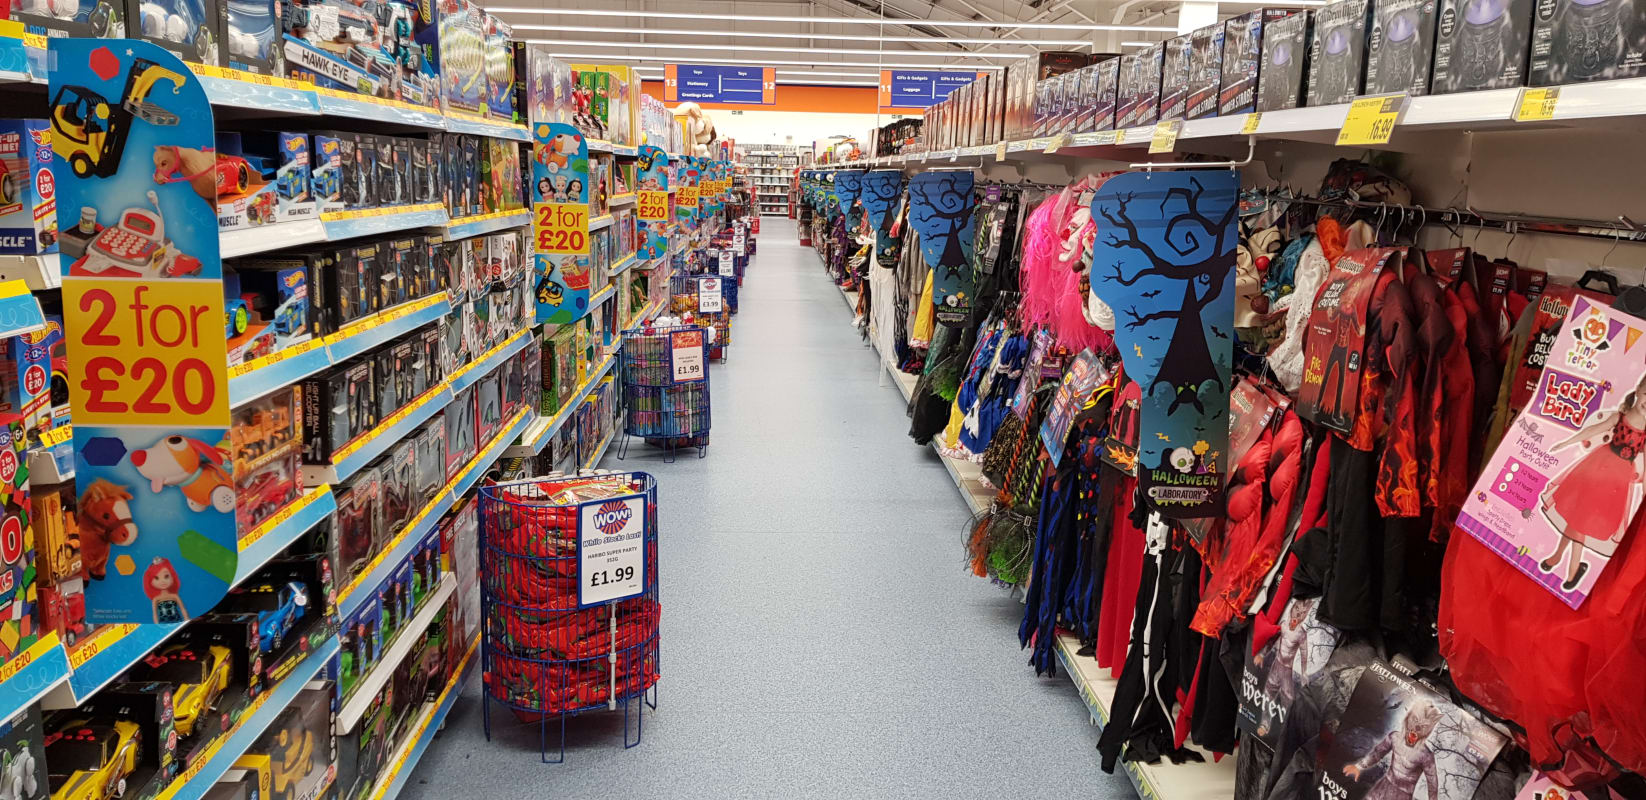 B&M's Shrewsbury store has plenty to offer customers, including a spooky selection of Halloween costumes and kids toys.